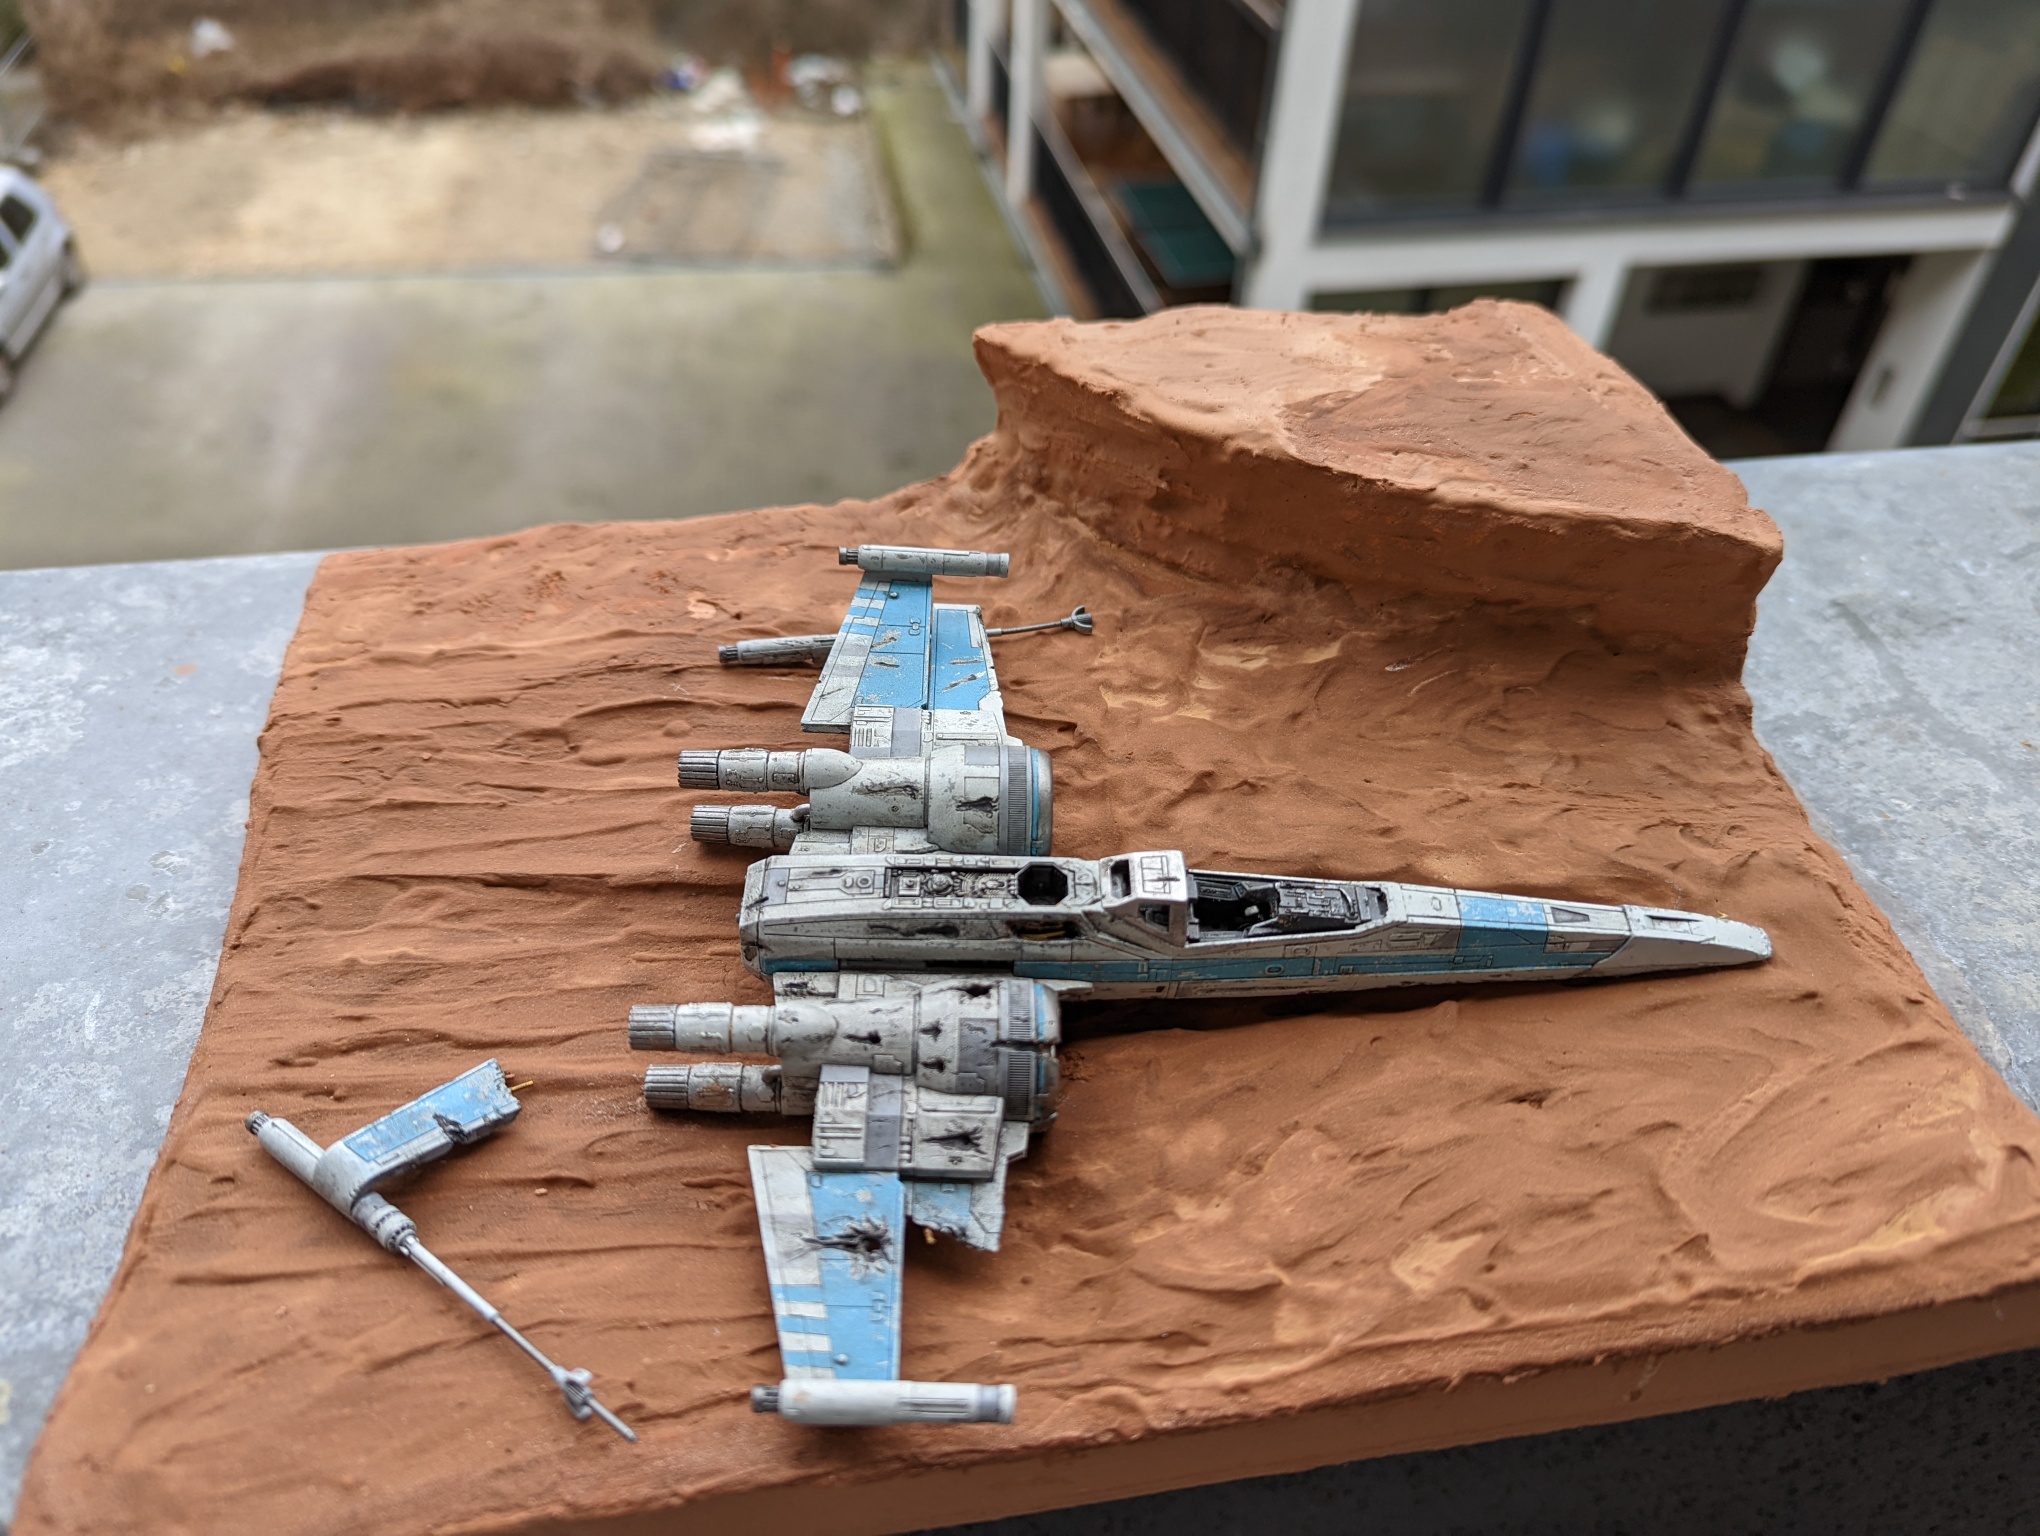 I planned to make a trail of the X-wing as it was sliding through the mud by pressing the model to the paste. But the paste was too sticky and I didn't really manage to do a good imprint. I had to fix it later.